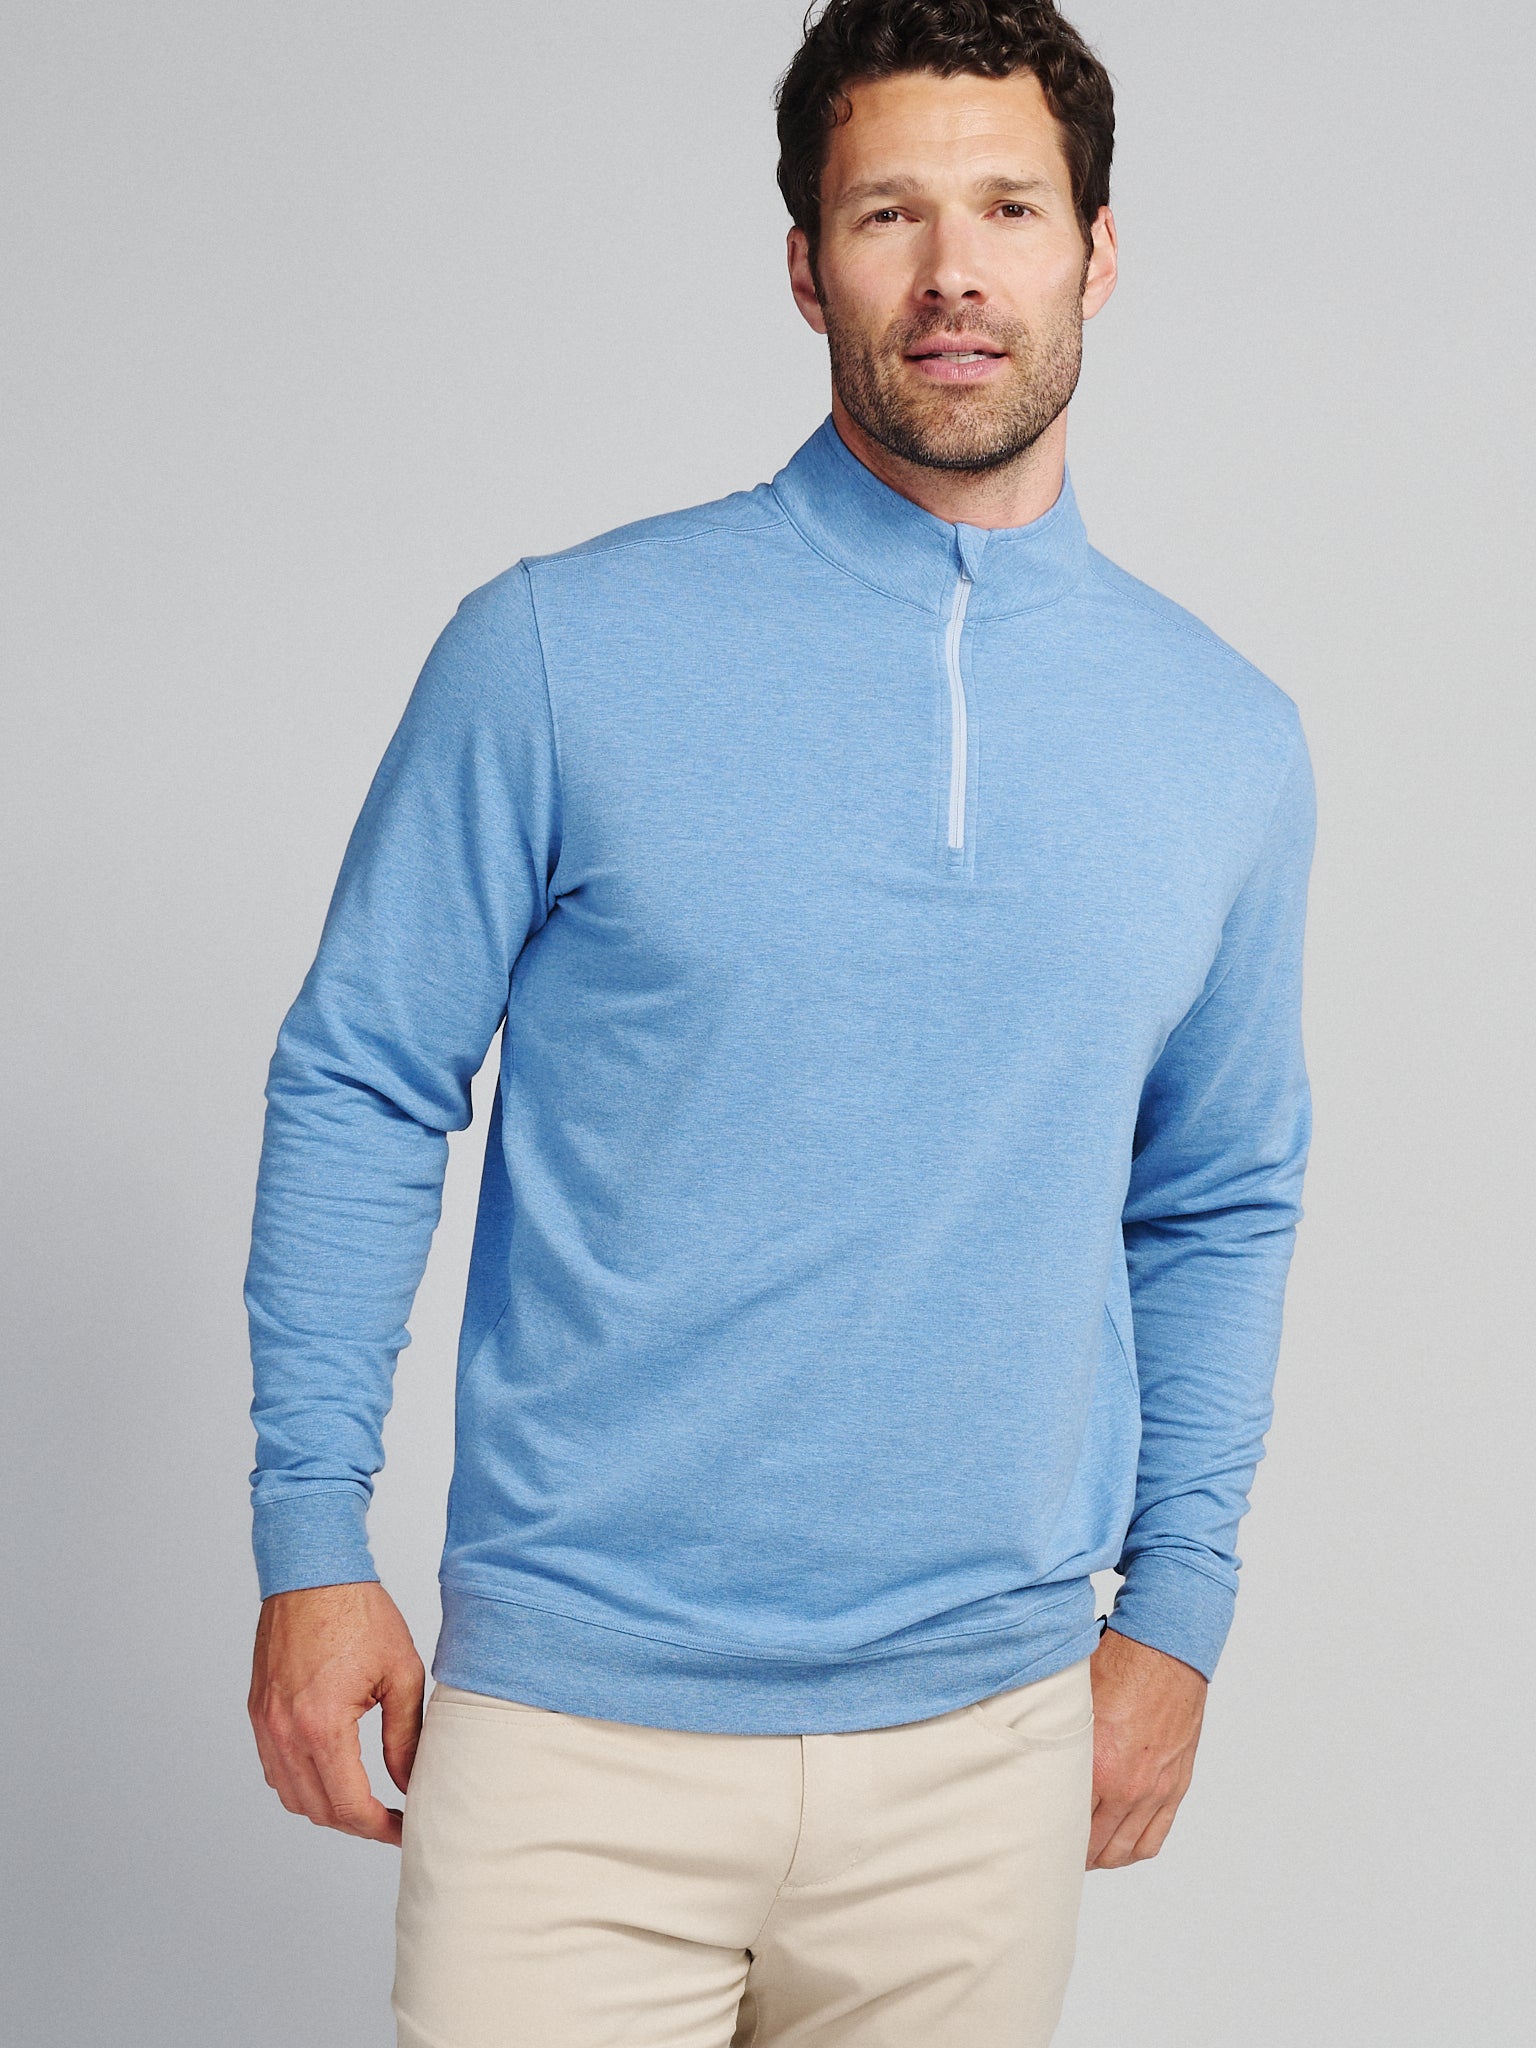 tasc Men's Quarter Zips: Cloud French Terry Quarter Zip - Size S in Chambray Heather - tasc Performance